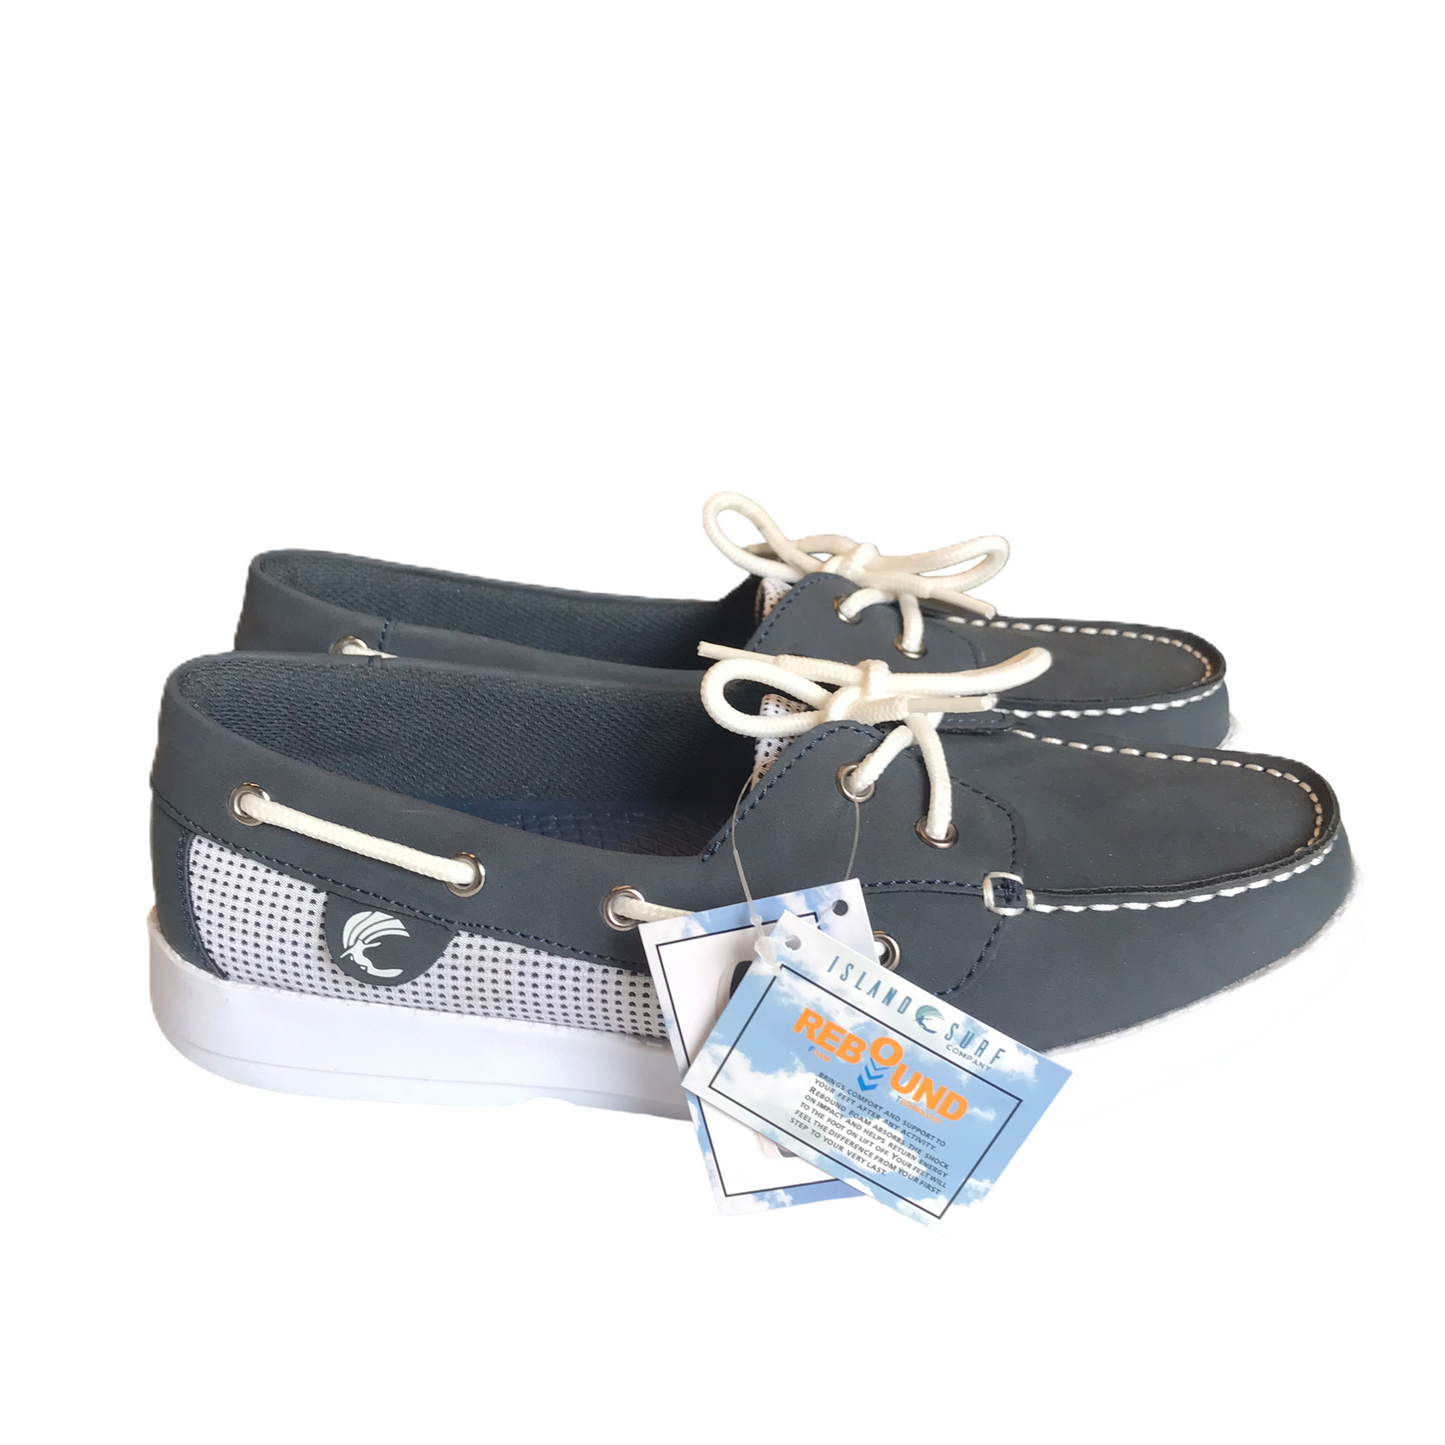 Navy Shoes Flats By Island Surf, Size: 9.5